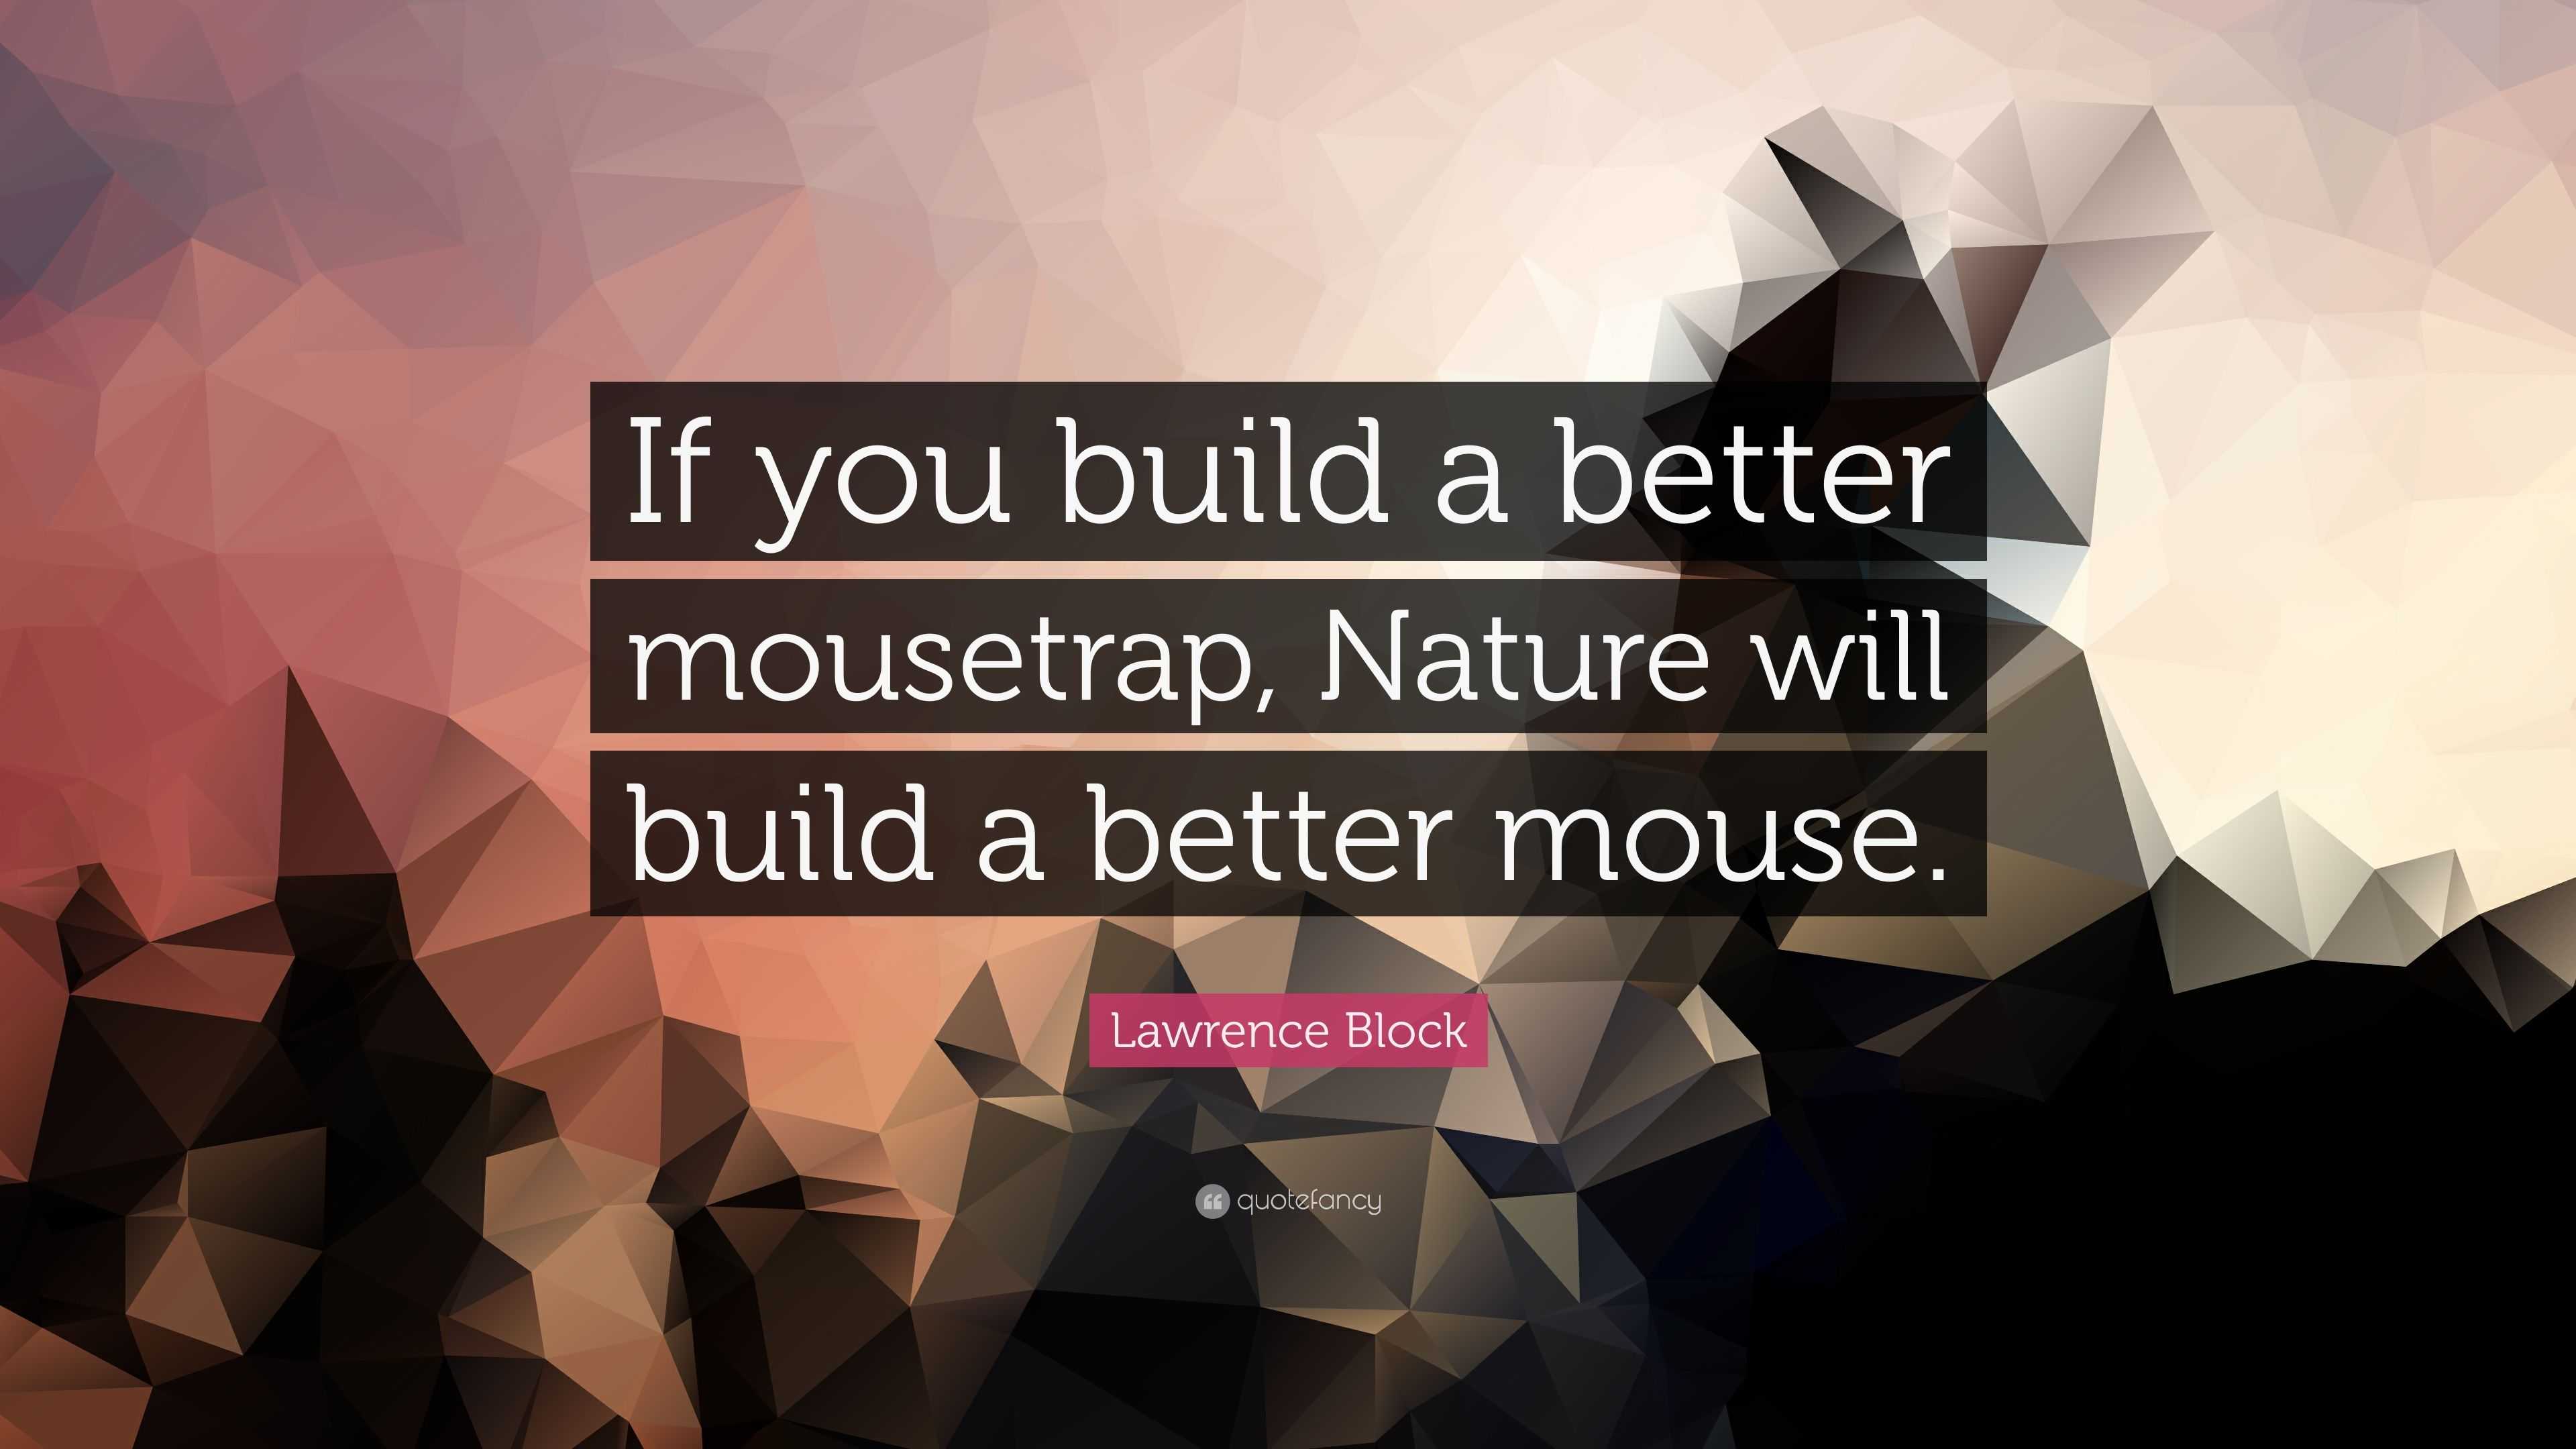 https://quotefancy.com/media/wallpaper/3840x2160/2993742-Lawrence-Block-Quote-If-you-build-a-better-mousetrap-Nature-will.jpg